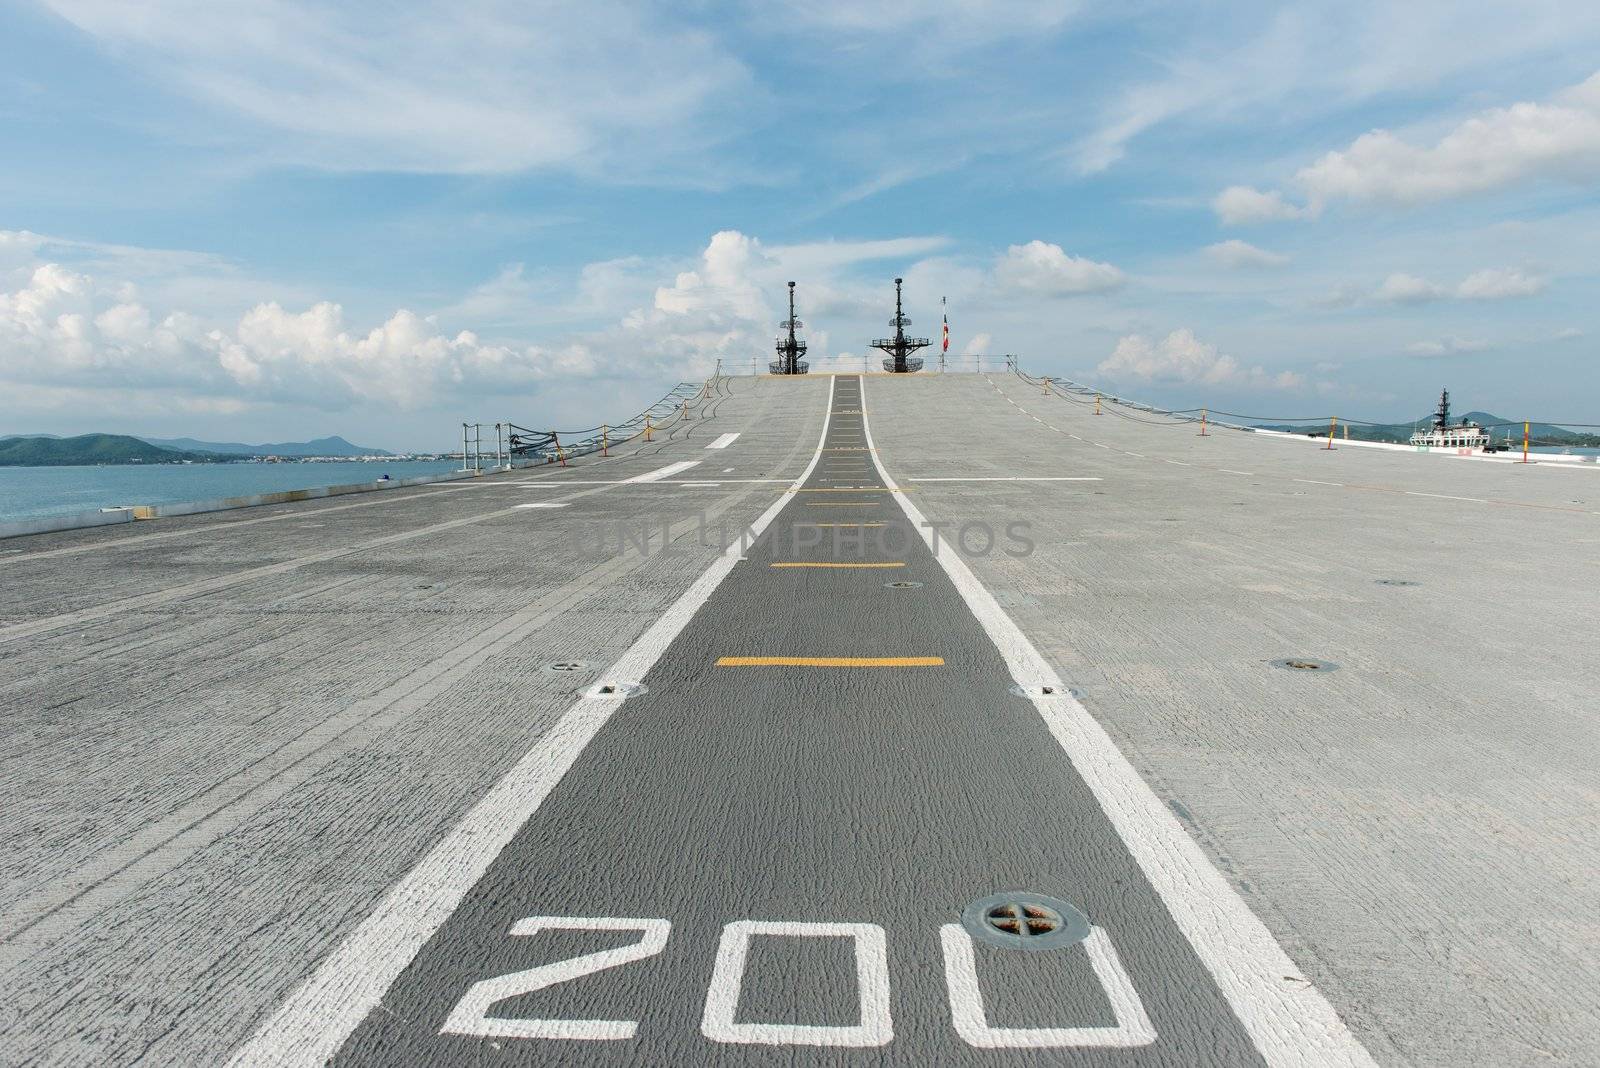 Concrete fighter jet run way of an aircraft carrier, taken on a sunny day in Thailand